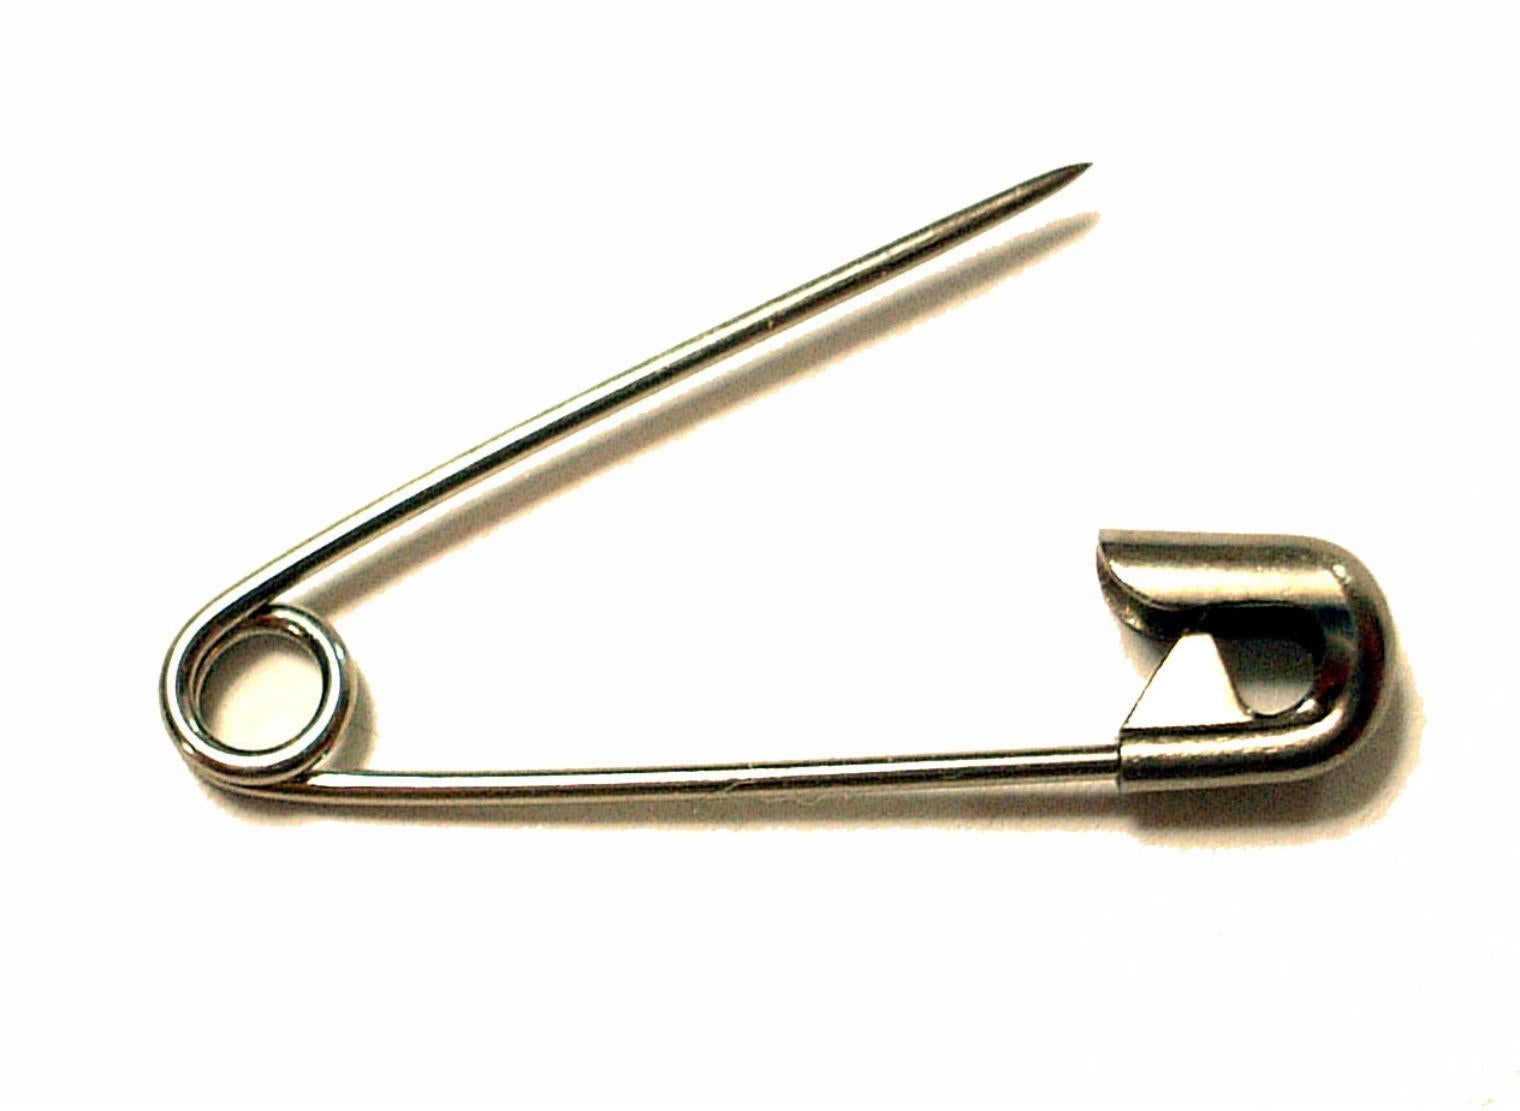 Safety pins are being worn to symbolise solidarity against racism / Wikimedia Commons